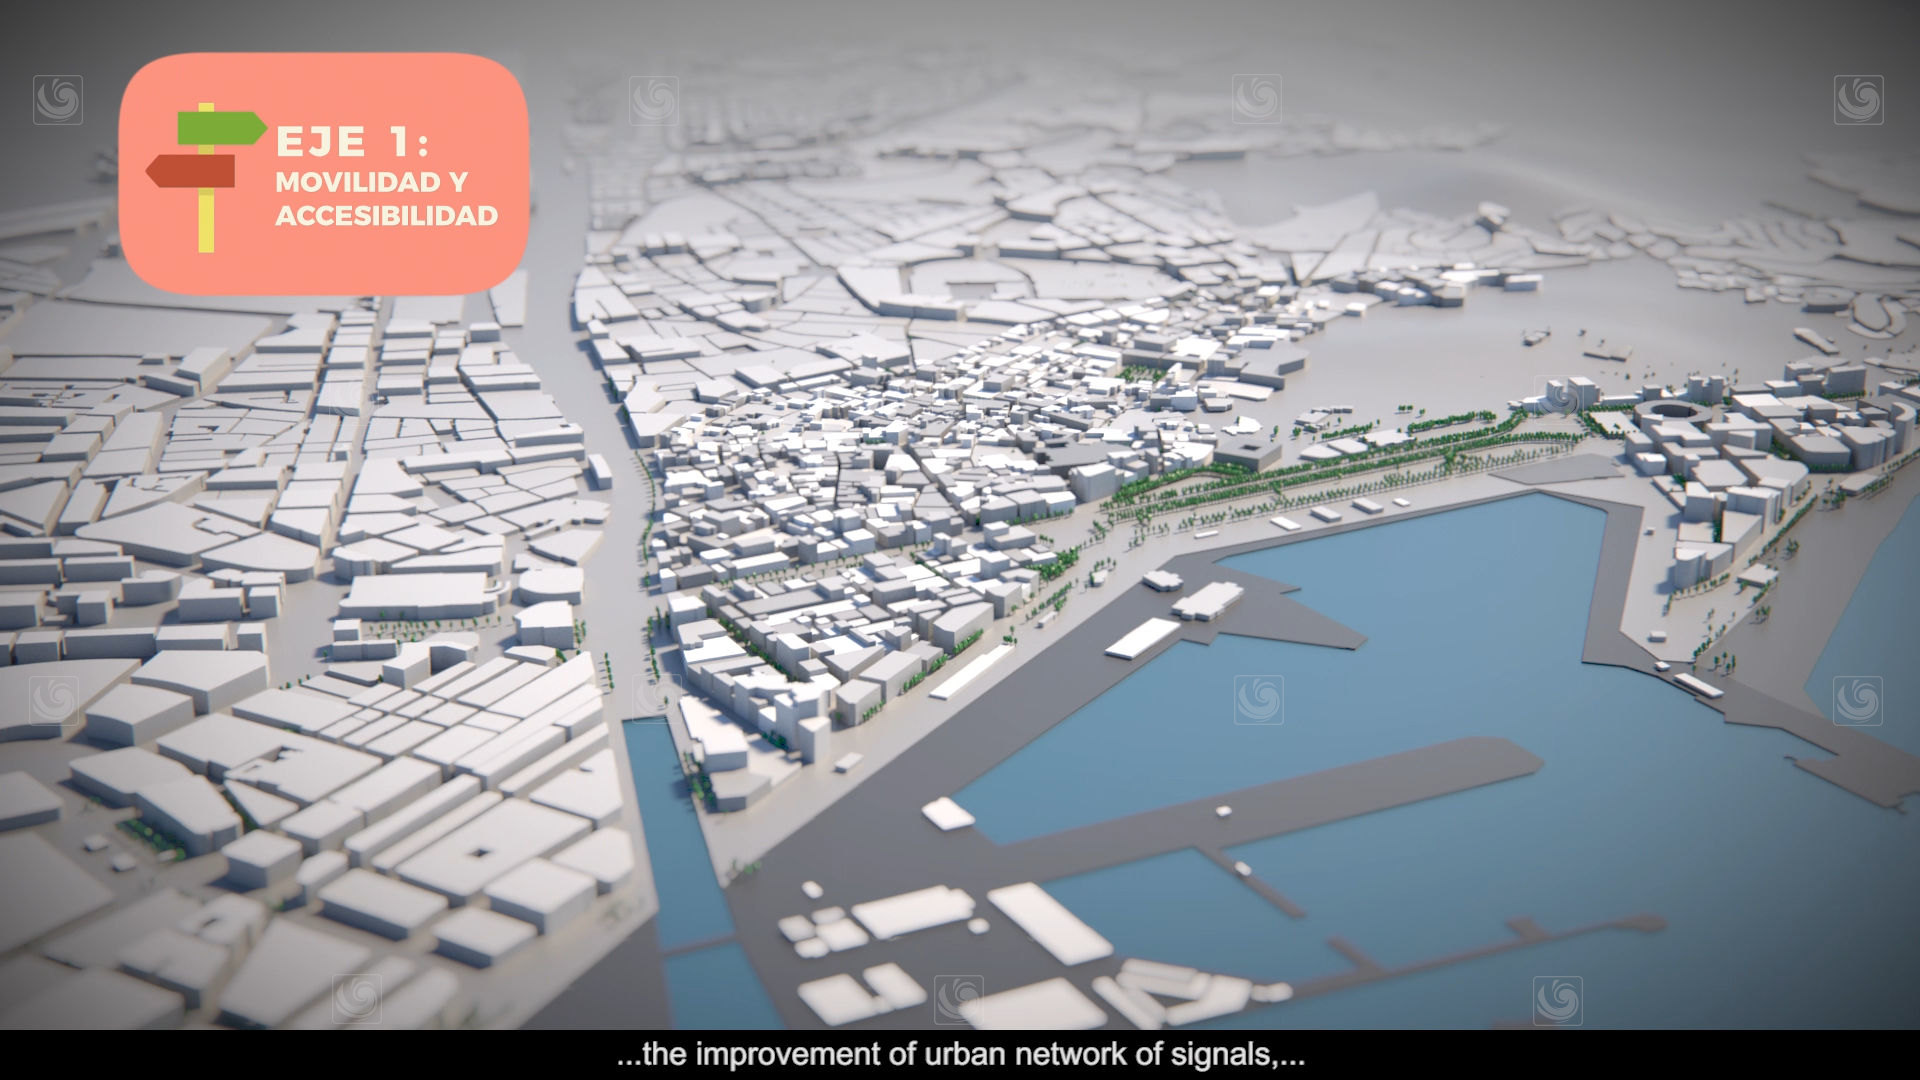 3D animation frame showing the city of Malaga